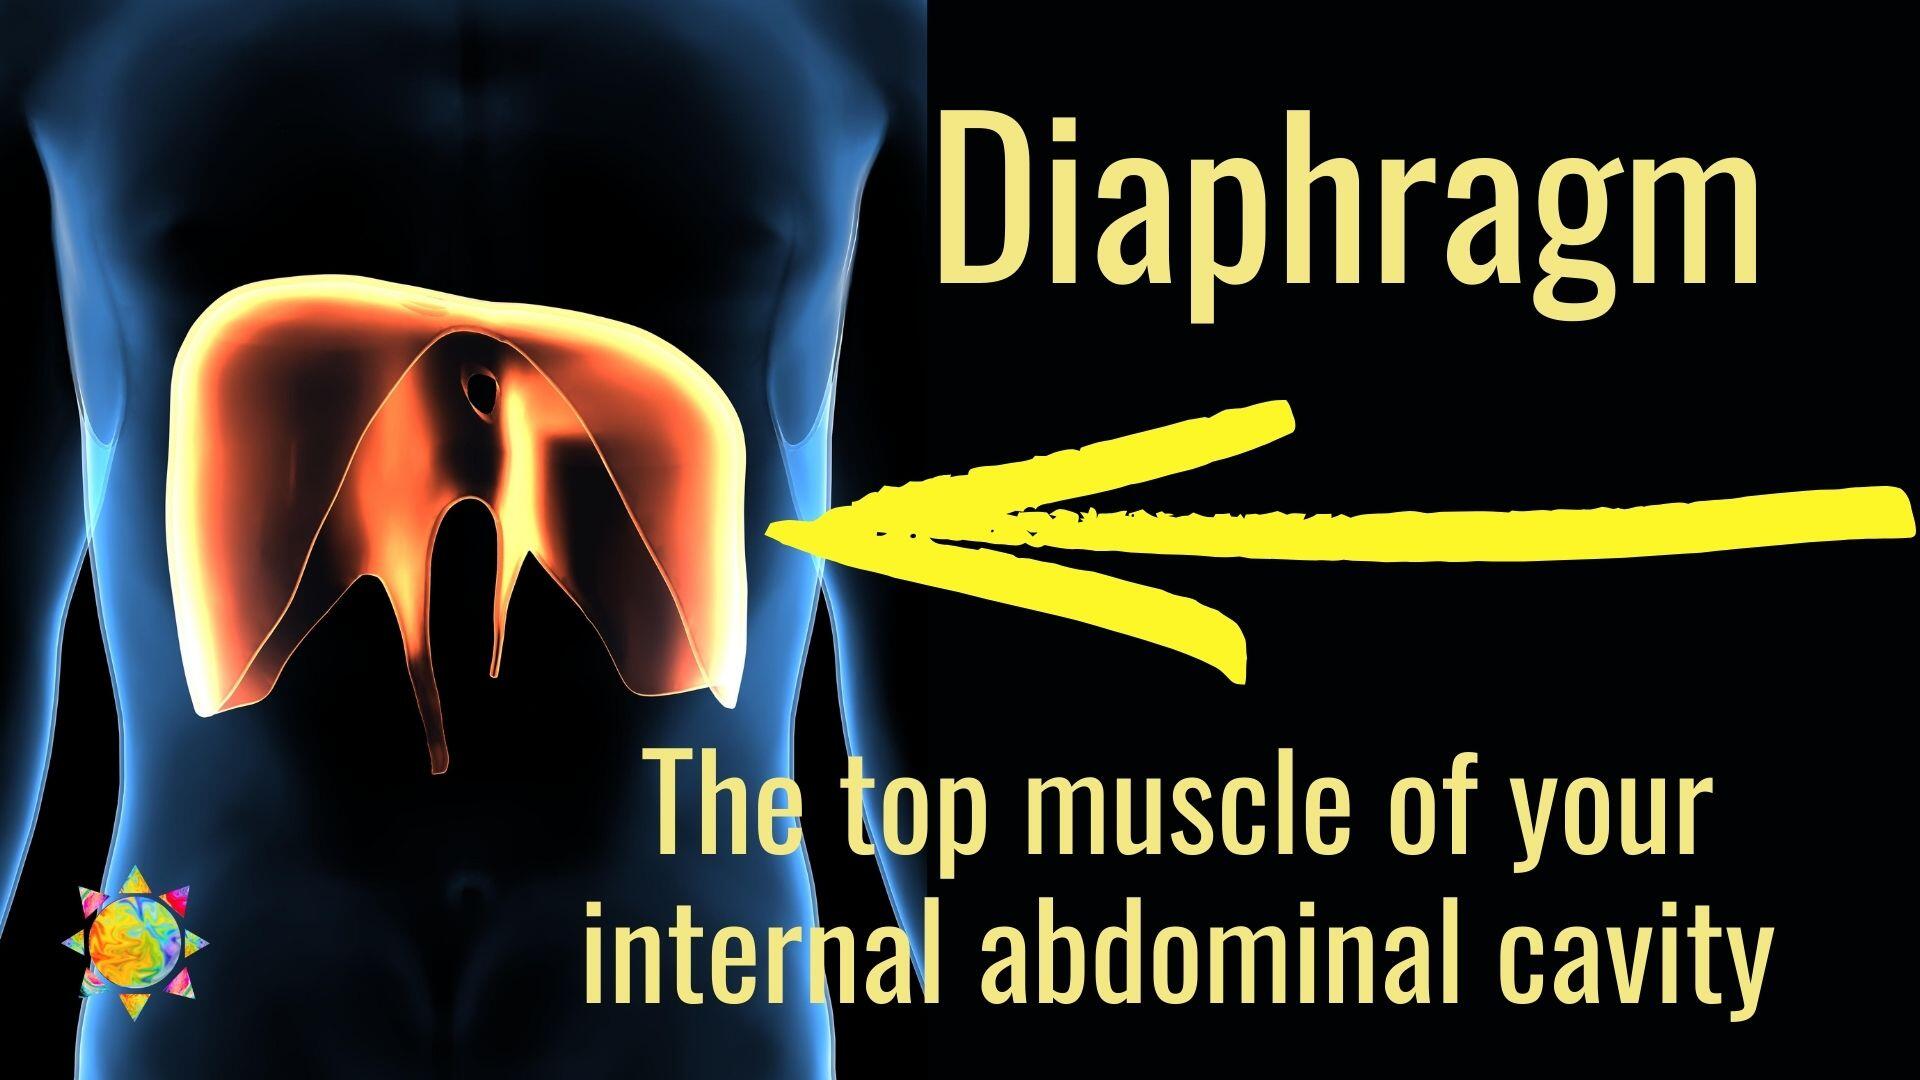 incontinence urge diaphragm the top omuscle of your abdominal cavity